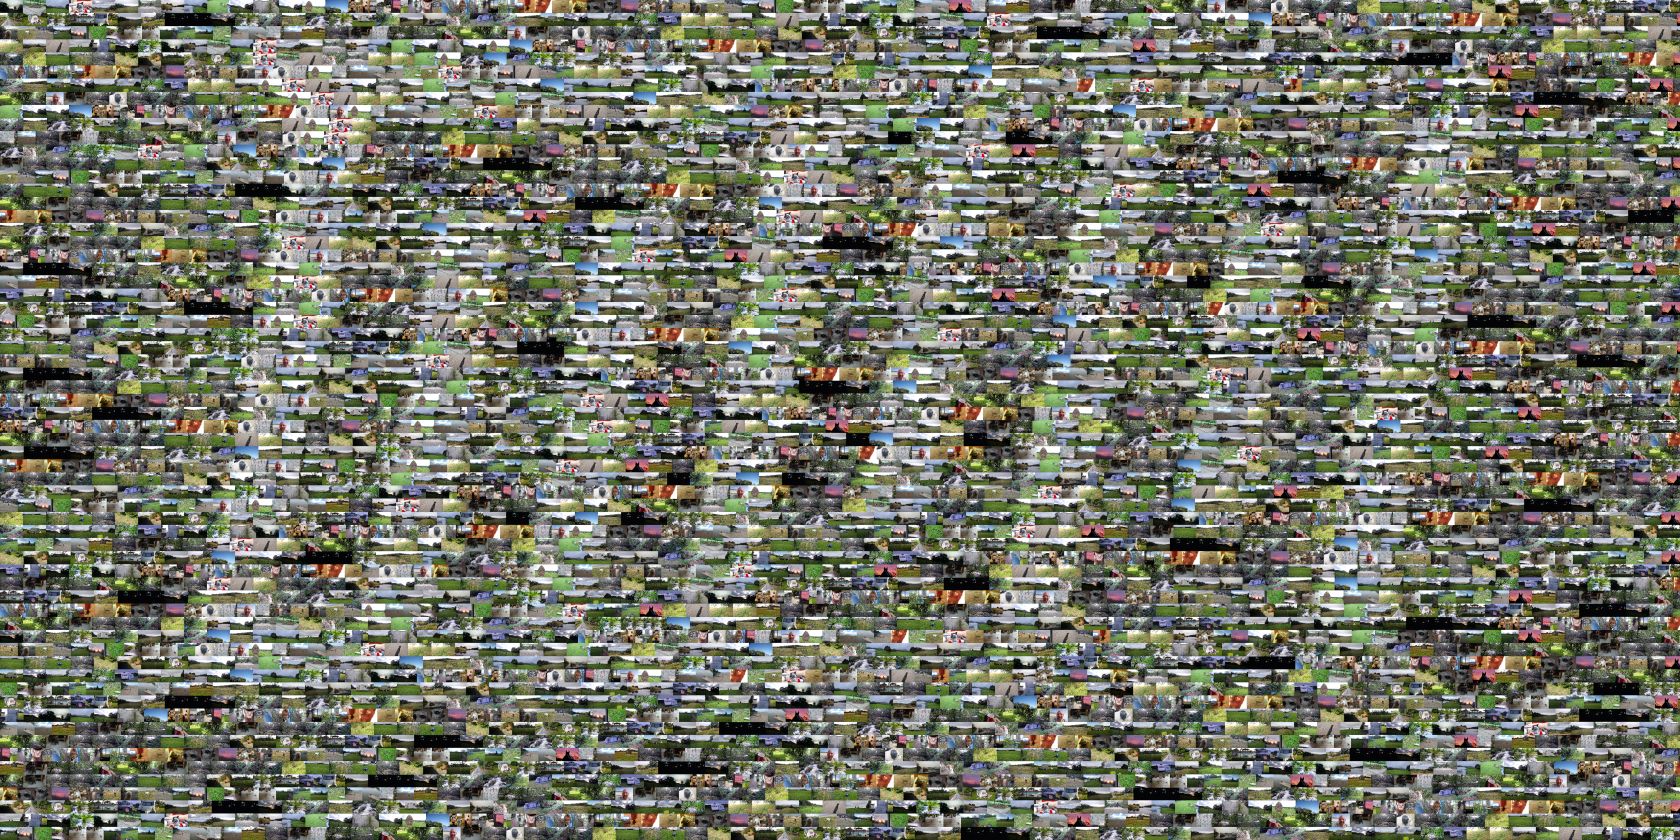 If you squint, it's a 64 line mosaic of the MUO logo